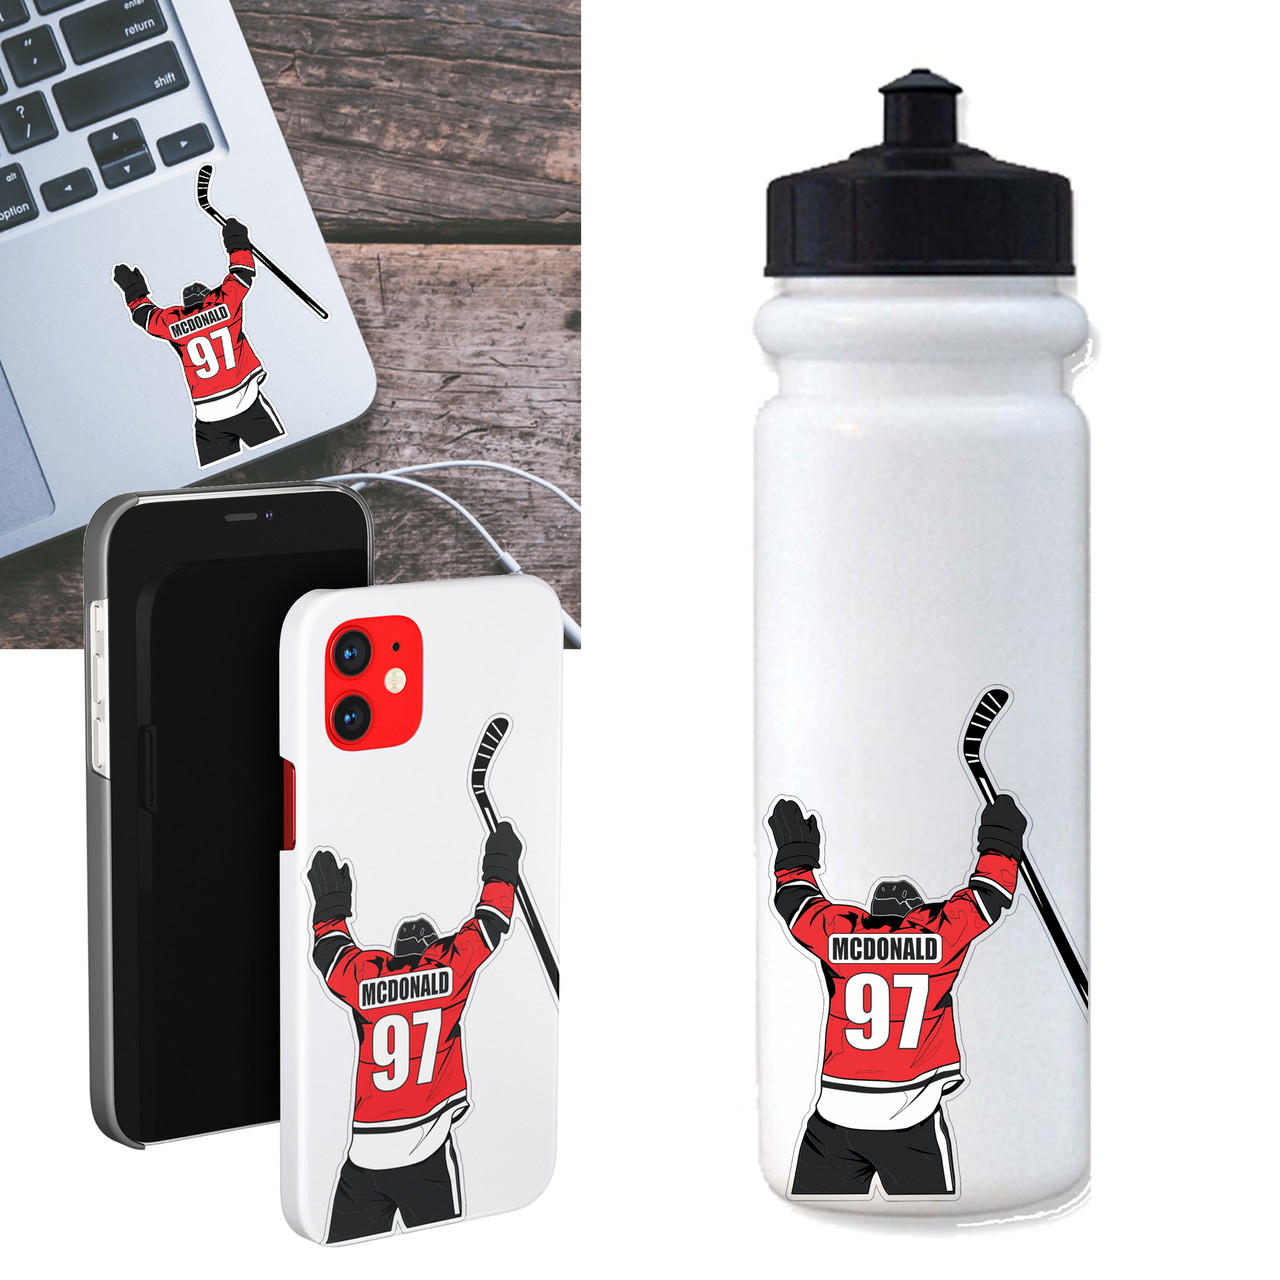 3 Pack Personalized Hockey Water Bottle Stickers Questions & Answers